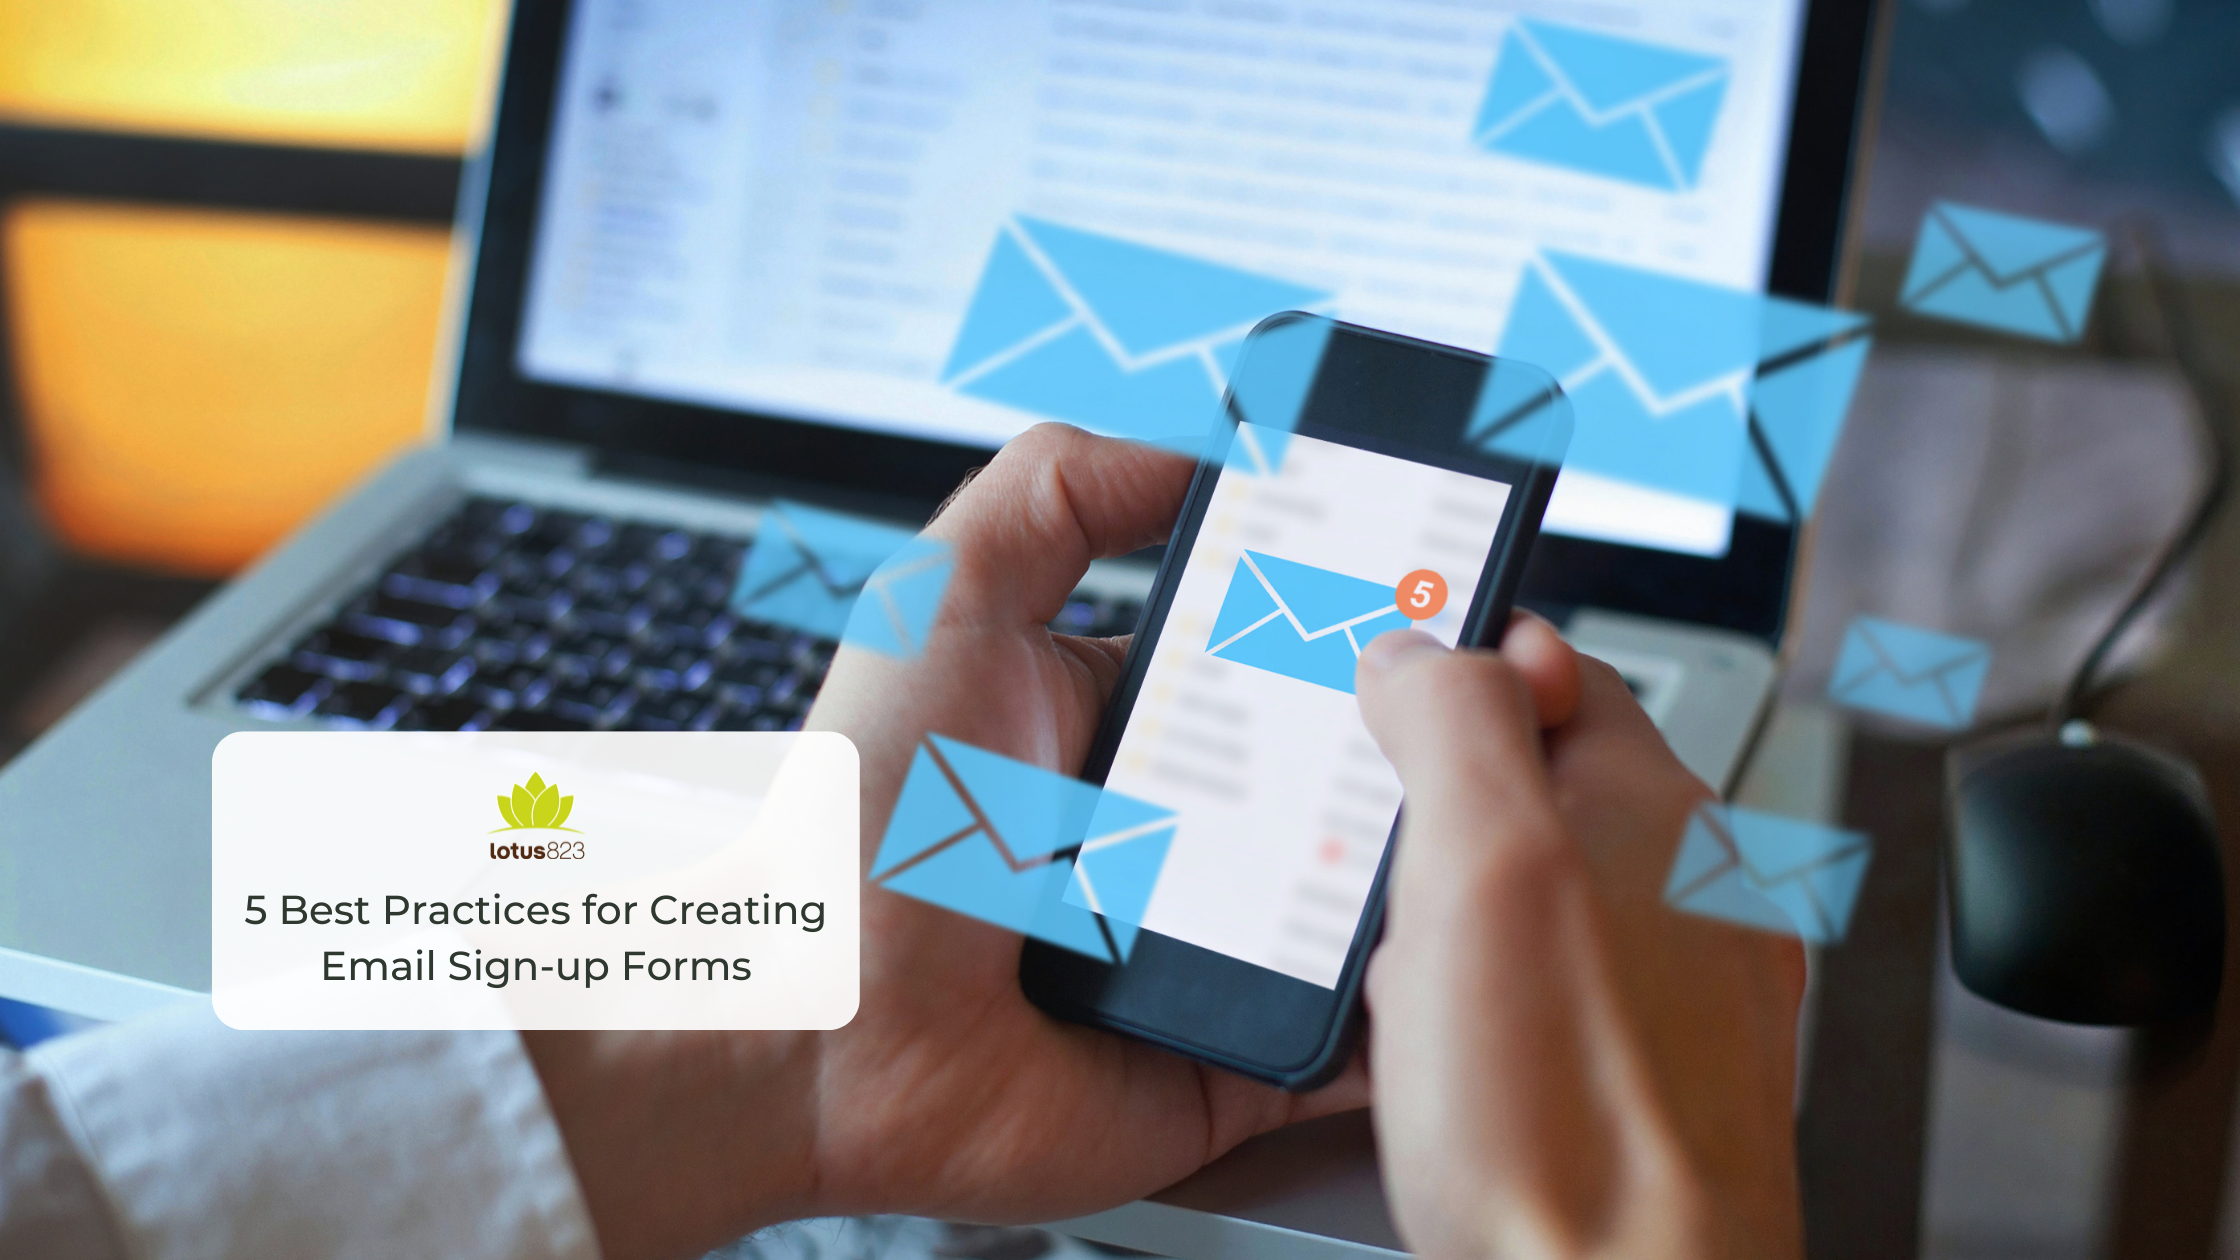 5 Best Practices for Creating Email Sign-up Forms